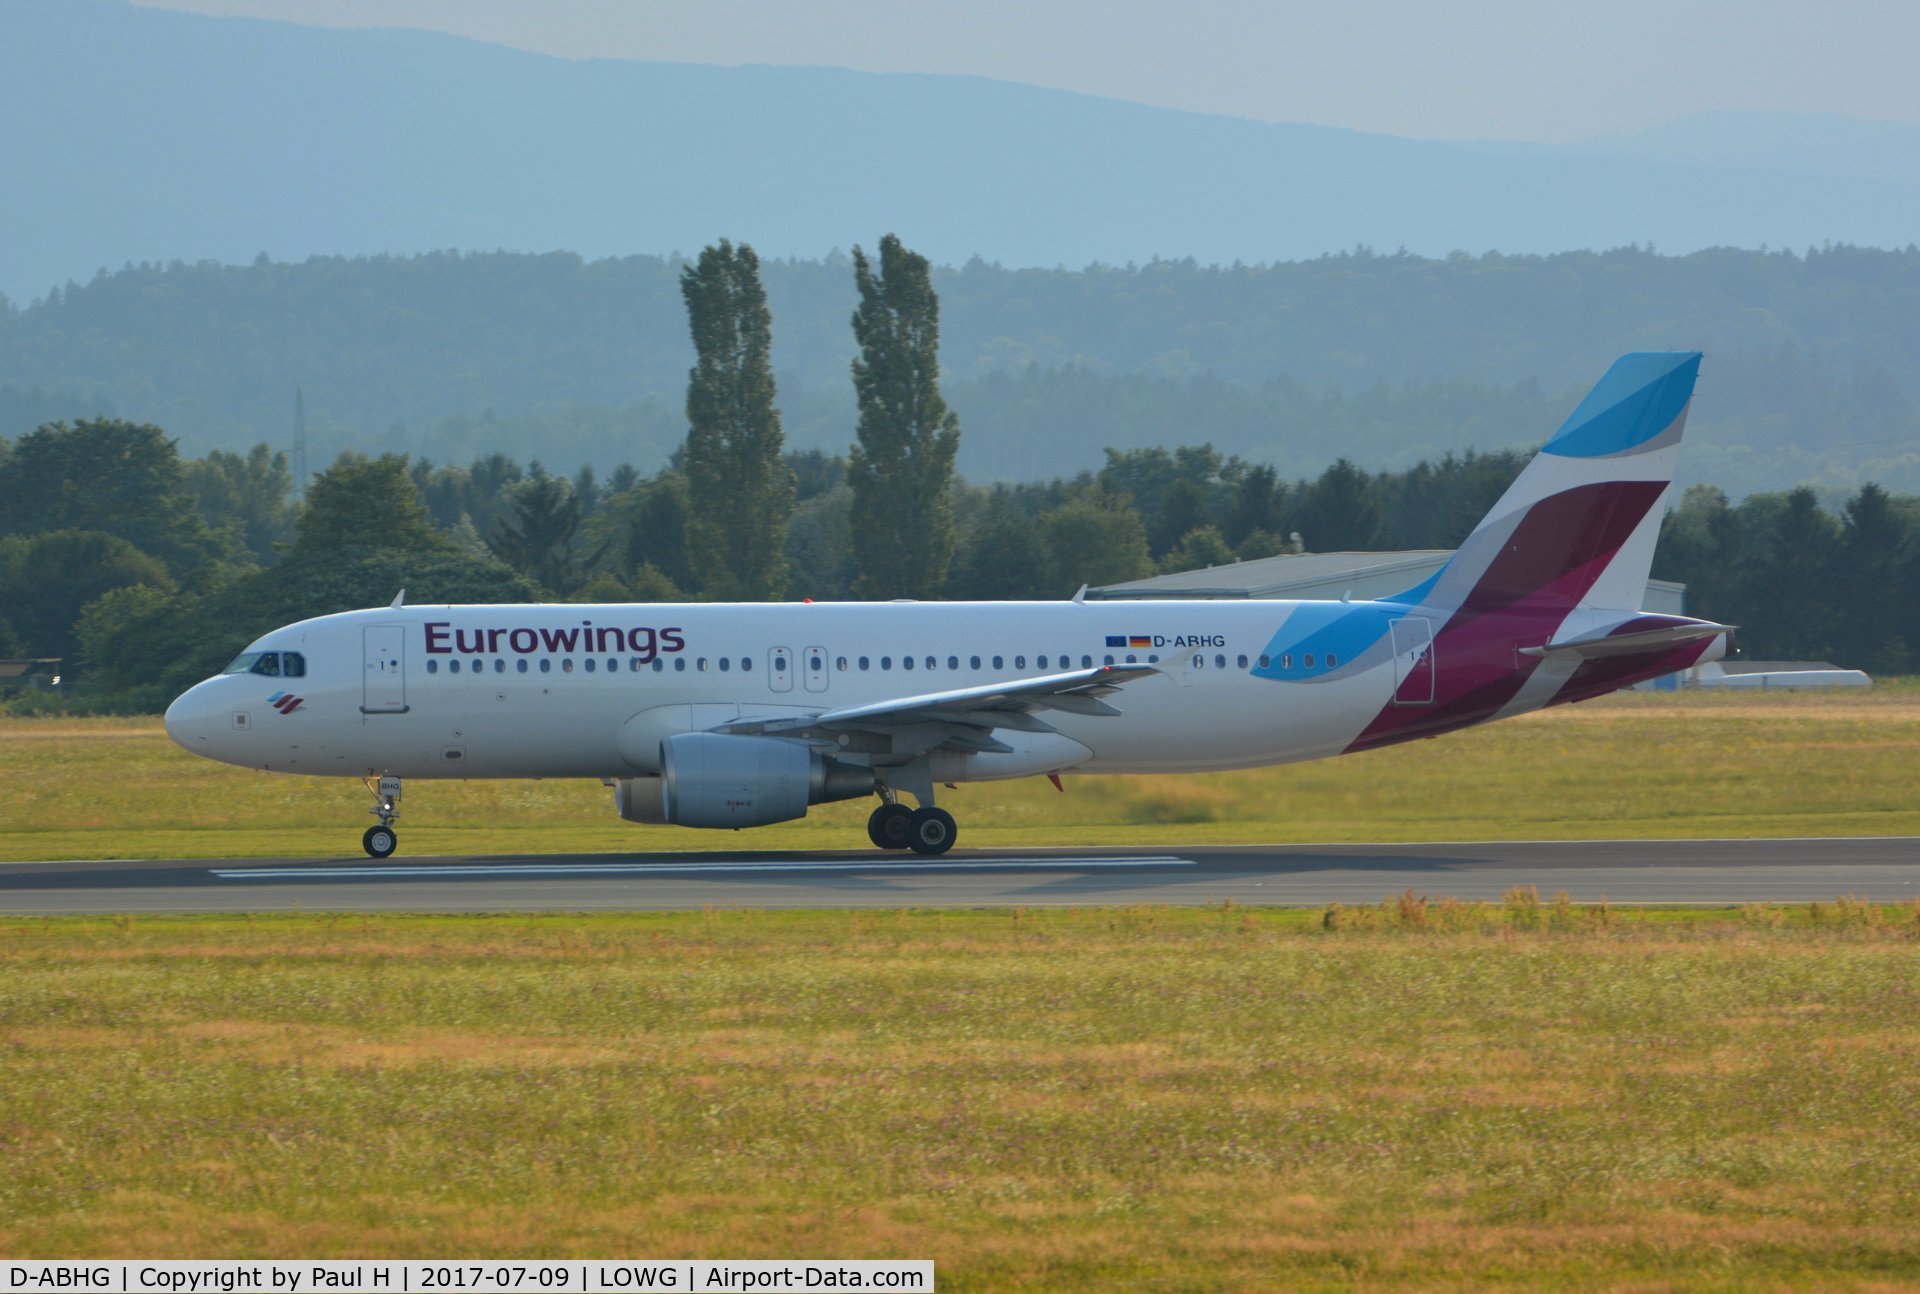 D-ABHG, 2006 Airbus A320-214 C/N 2867, Eurowings A320 taking-off at LOWG